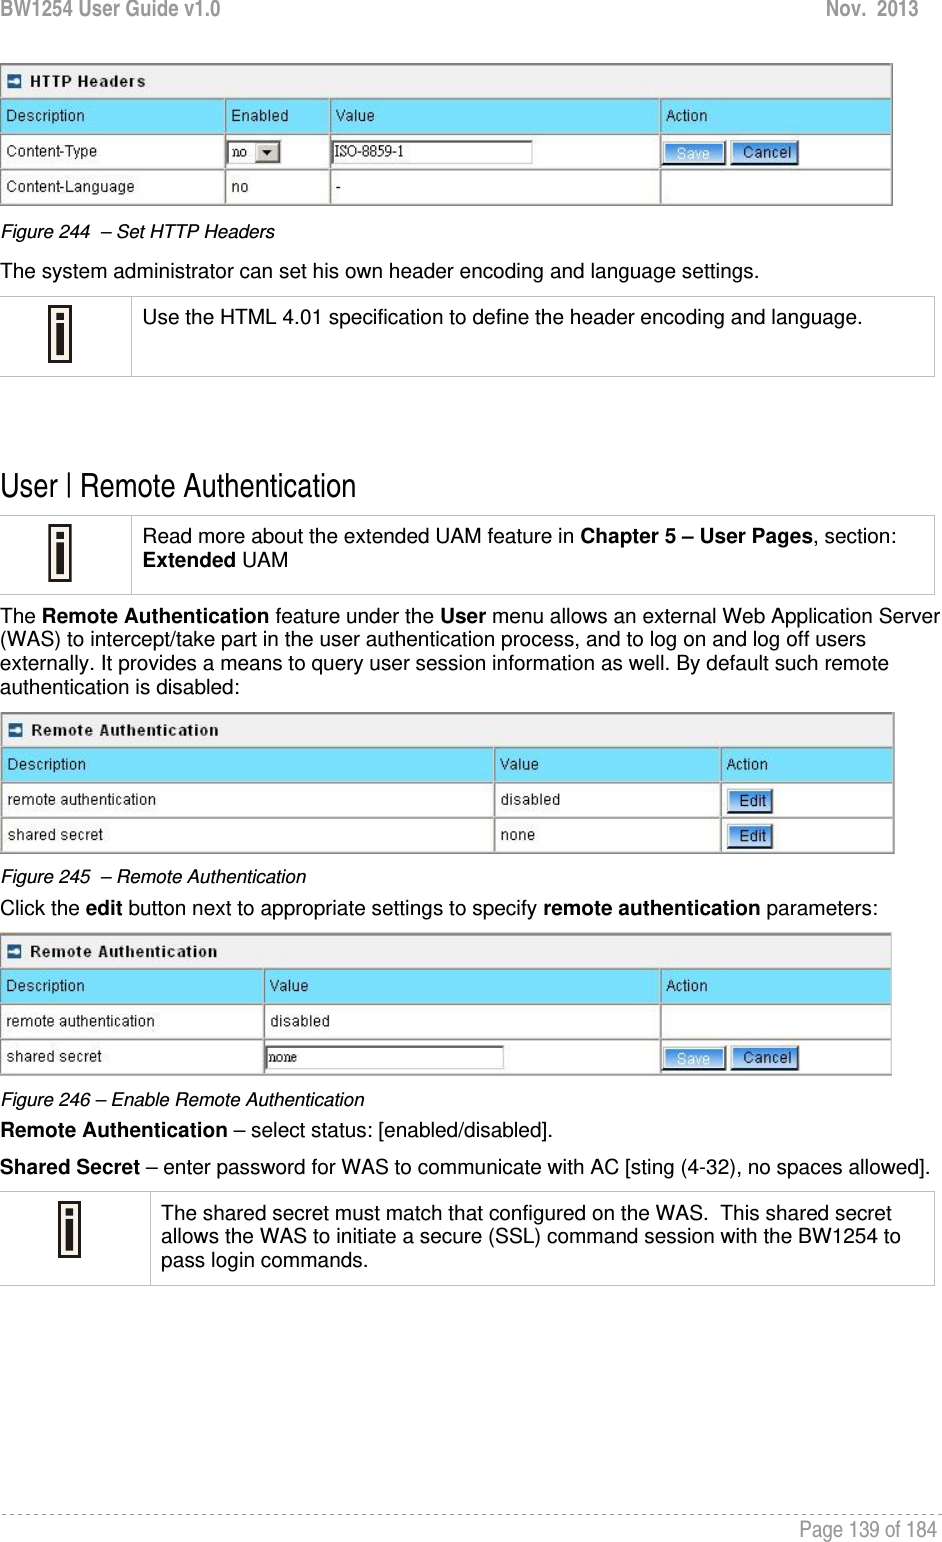 BW1254 User Guide v1.0  Nov.  2013     Page 139 of 184    Figure 244  – Set HTTP Headers  The system administrator can set his own header encoding and language settings.  Use the HTML 4.01 specification to define the header encoding and language.   User | Remote Authentication   Read more about the extended UAM feature in Chapter 5 – User Pages, section: Extended UAM The Remote Authentication feature under the User menu allows an external Web Application Server (WAS) to intercept/take part in the user authentication process, and to log on and log off users externally. It provides a means to query user session information as well. By default such remote authentication is disabled:  Figure 245  – Remote Authentication Click the edit button next to appropriate settings to specify remote authentication parameters:  Figure 246 – Enable Remote Authentication Remote Authentication – select status: [enabled/disabled]. Shared Secret – enter password for WAS to communicate with AC [sting (4-32), no spaces allowed].  The shared secret must match that configured on the WAS.  This shared secret allows the WAS to initiate a secure (SSL) command session with the BW1254 to pass login commands.    